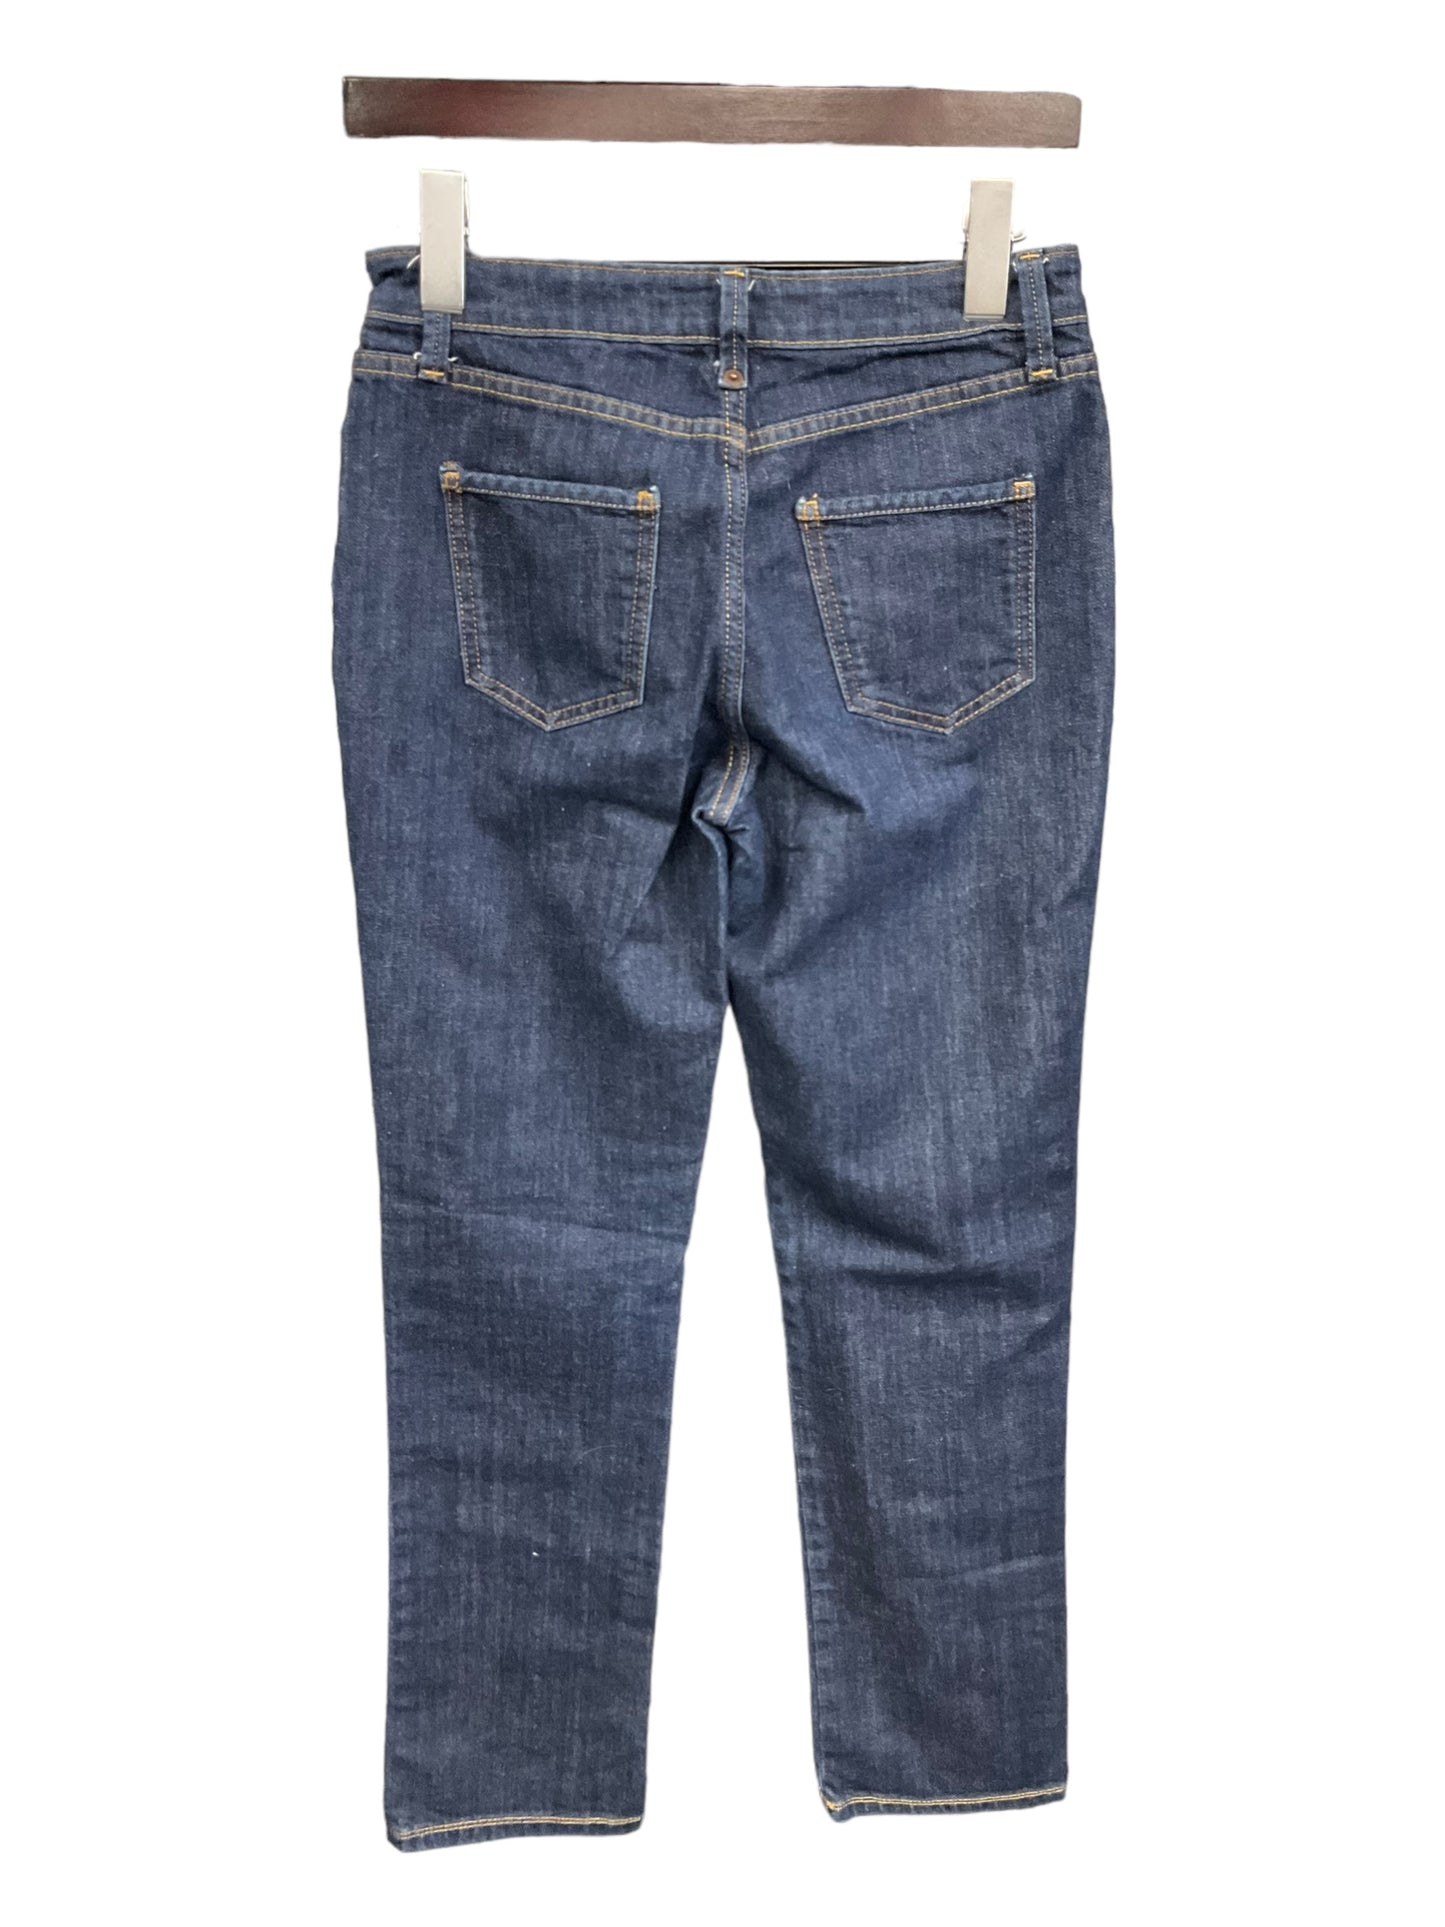 Jeans Straight By Boden  Size: 4